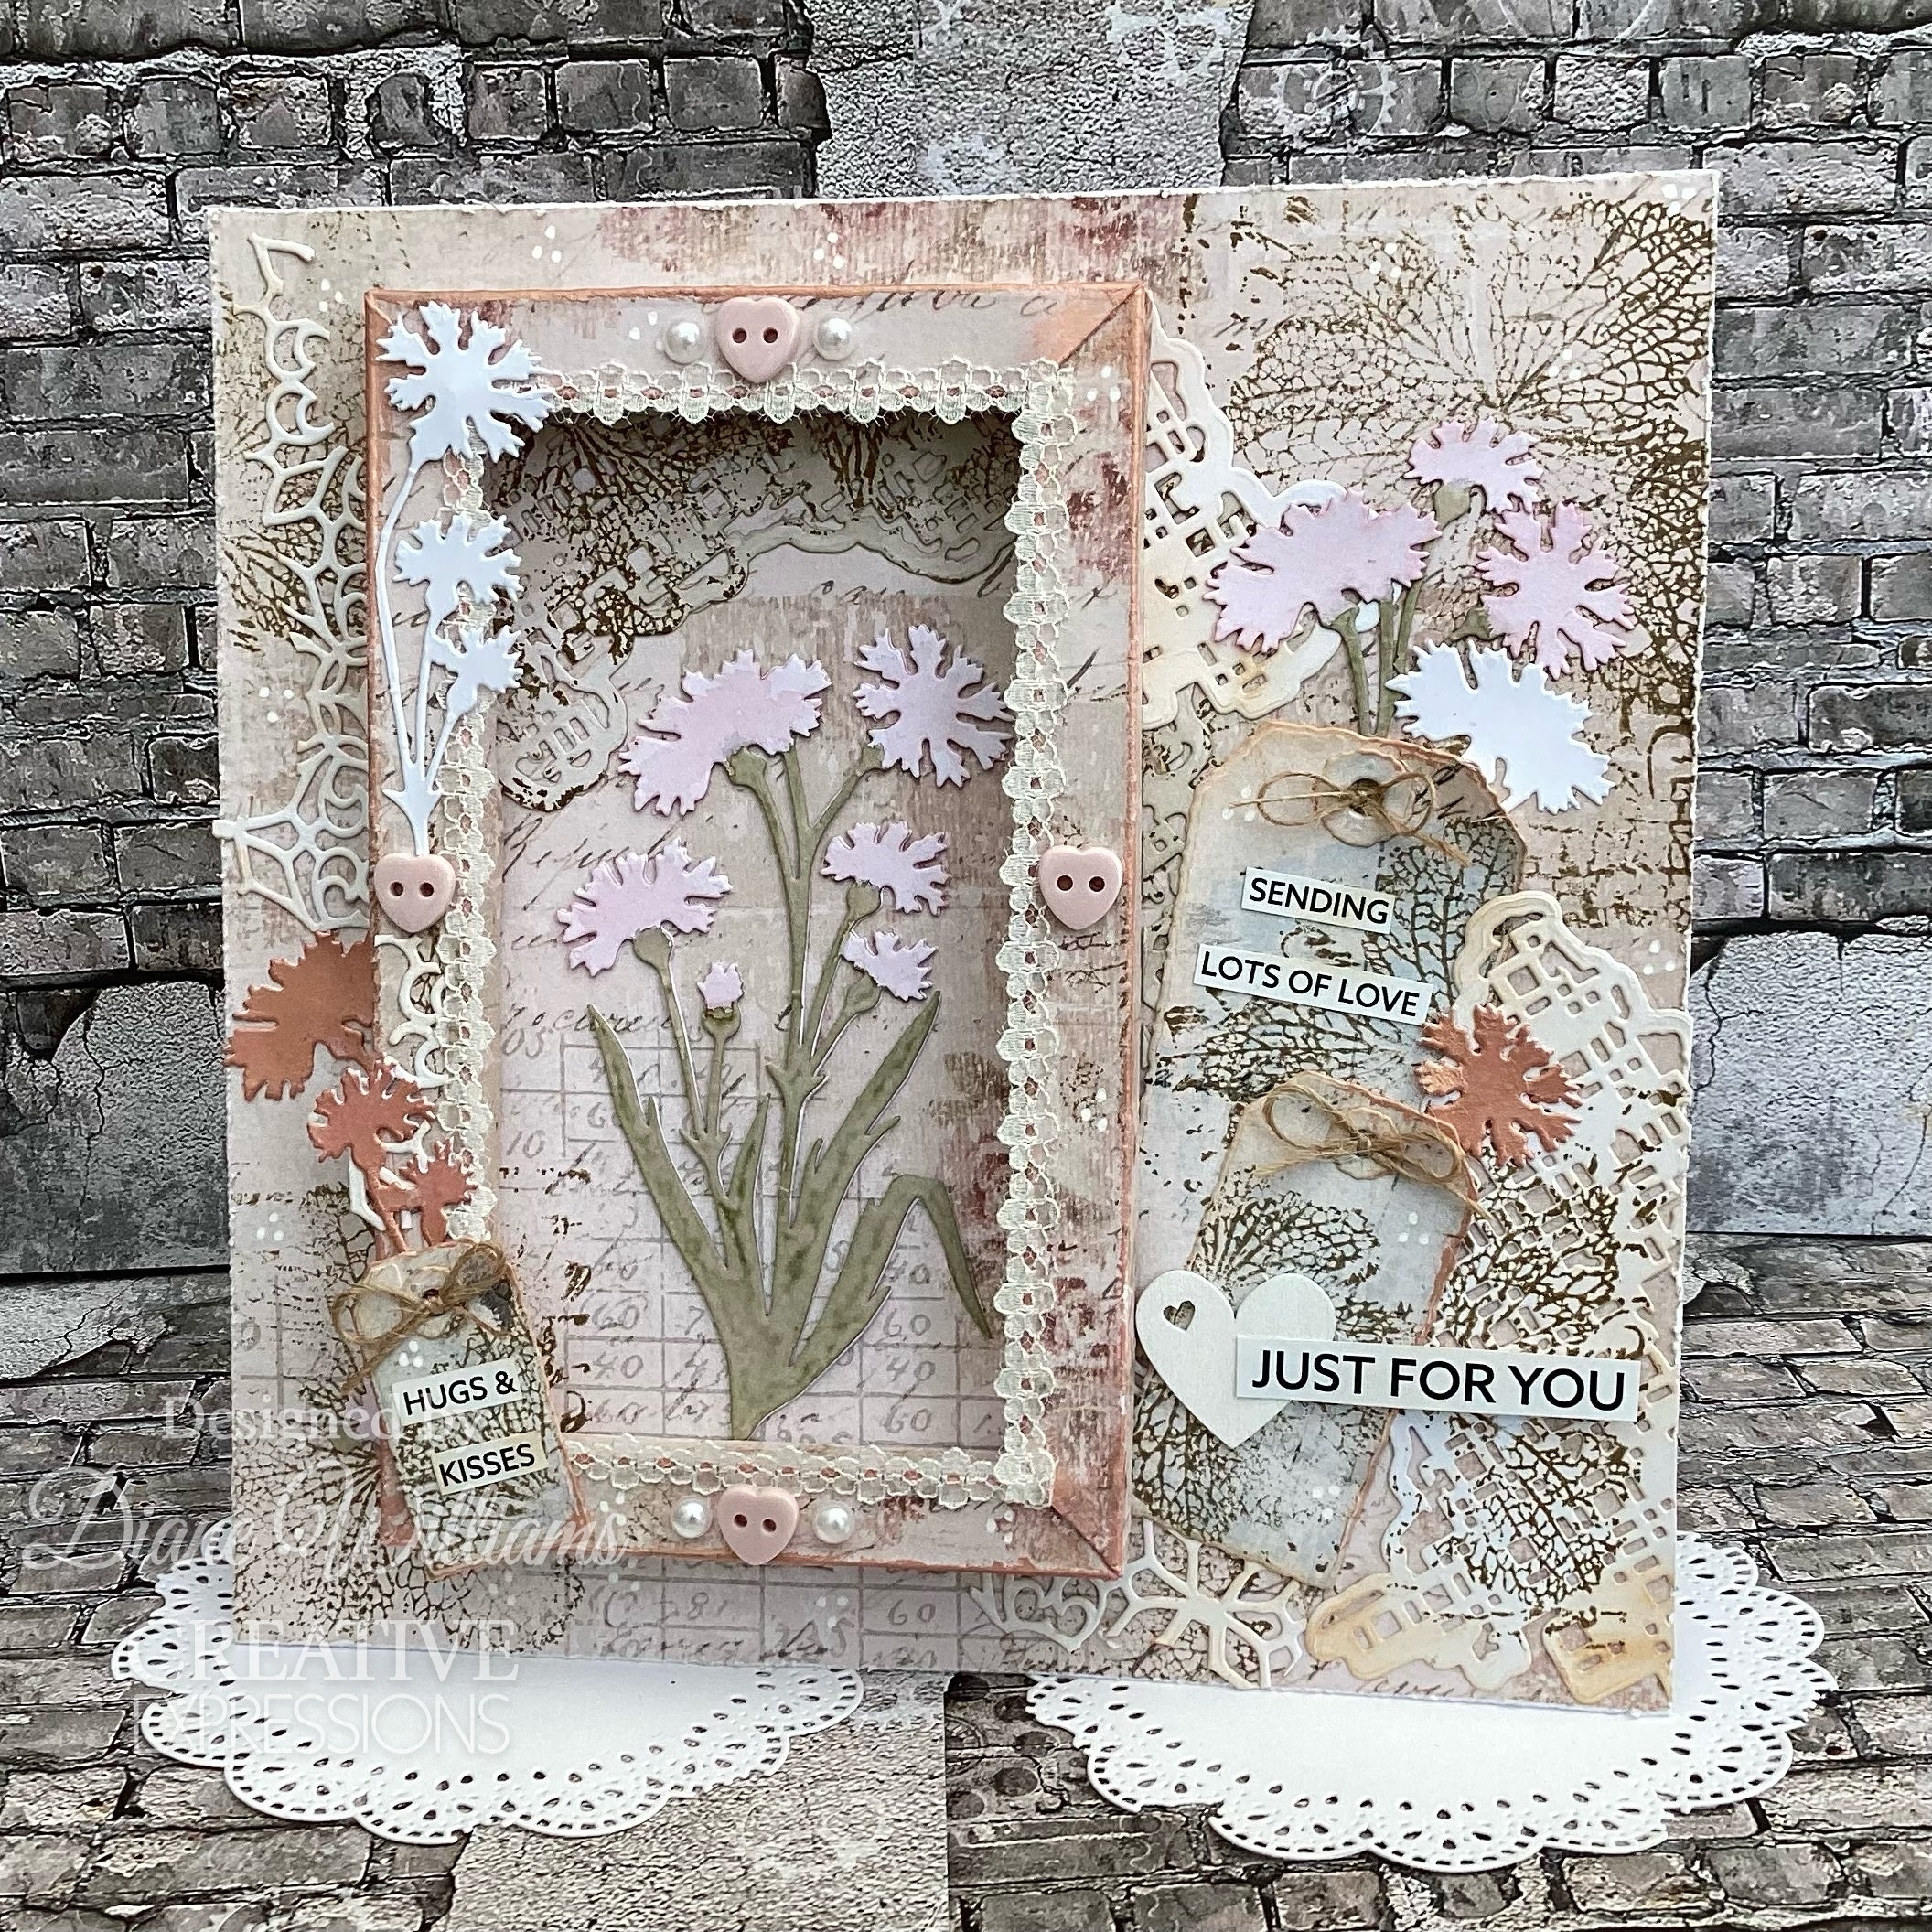 Creative Expressions Sam Poole Shabby Basics Hedgerow Thistle Craft Die